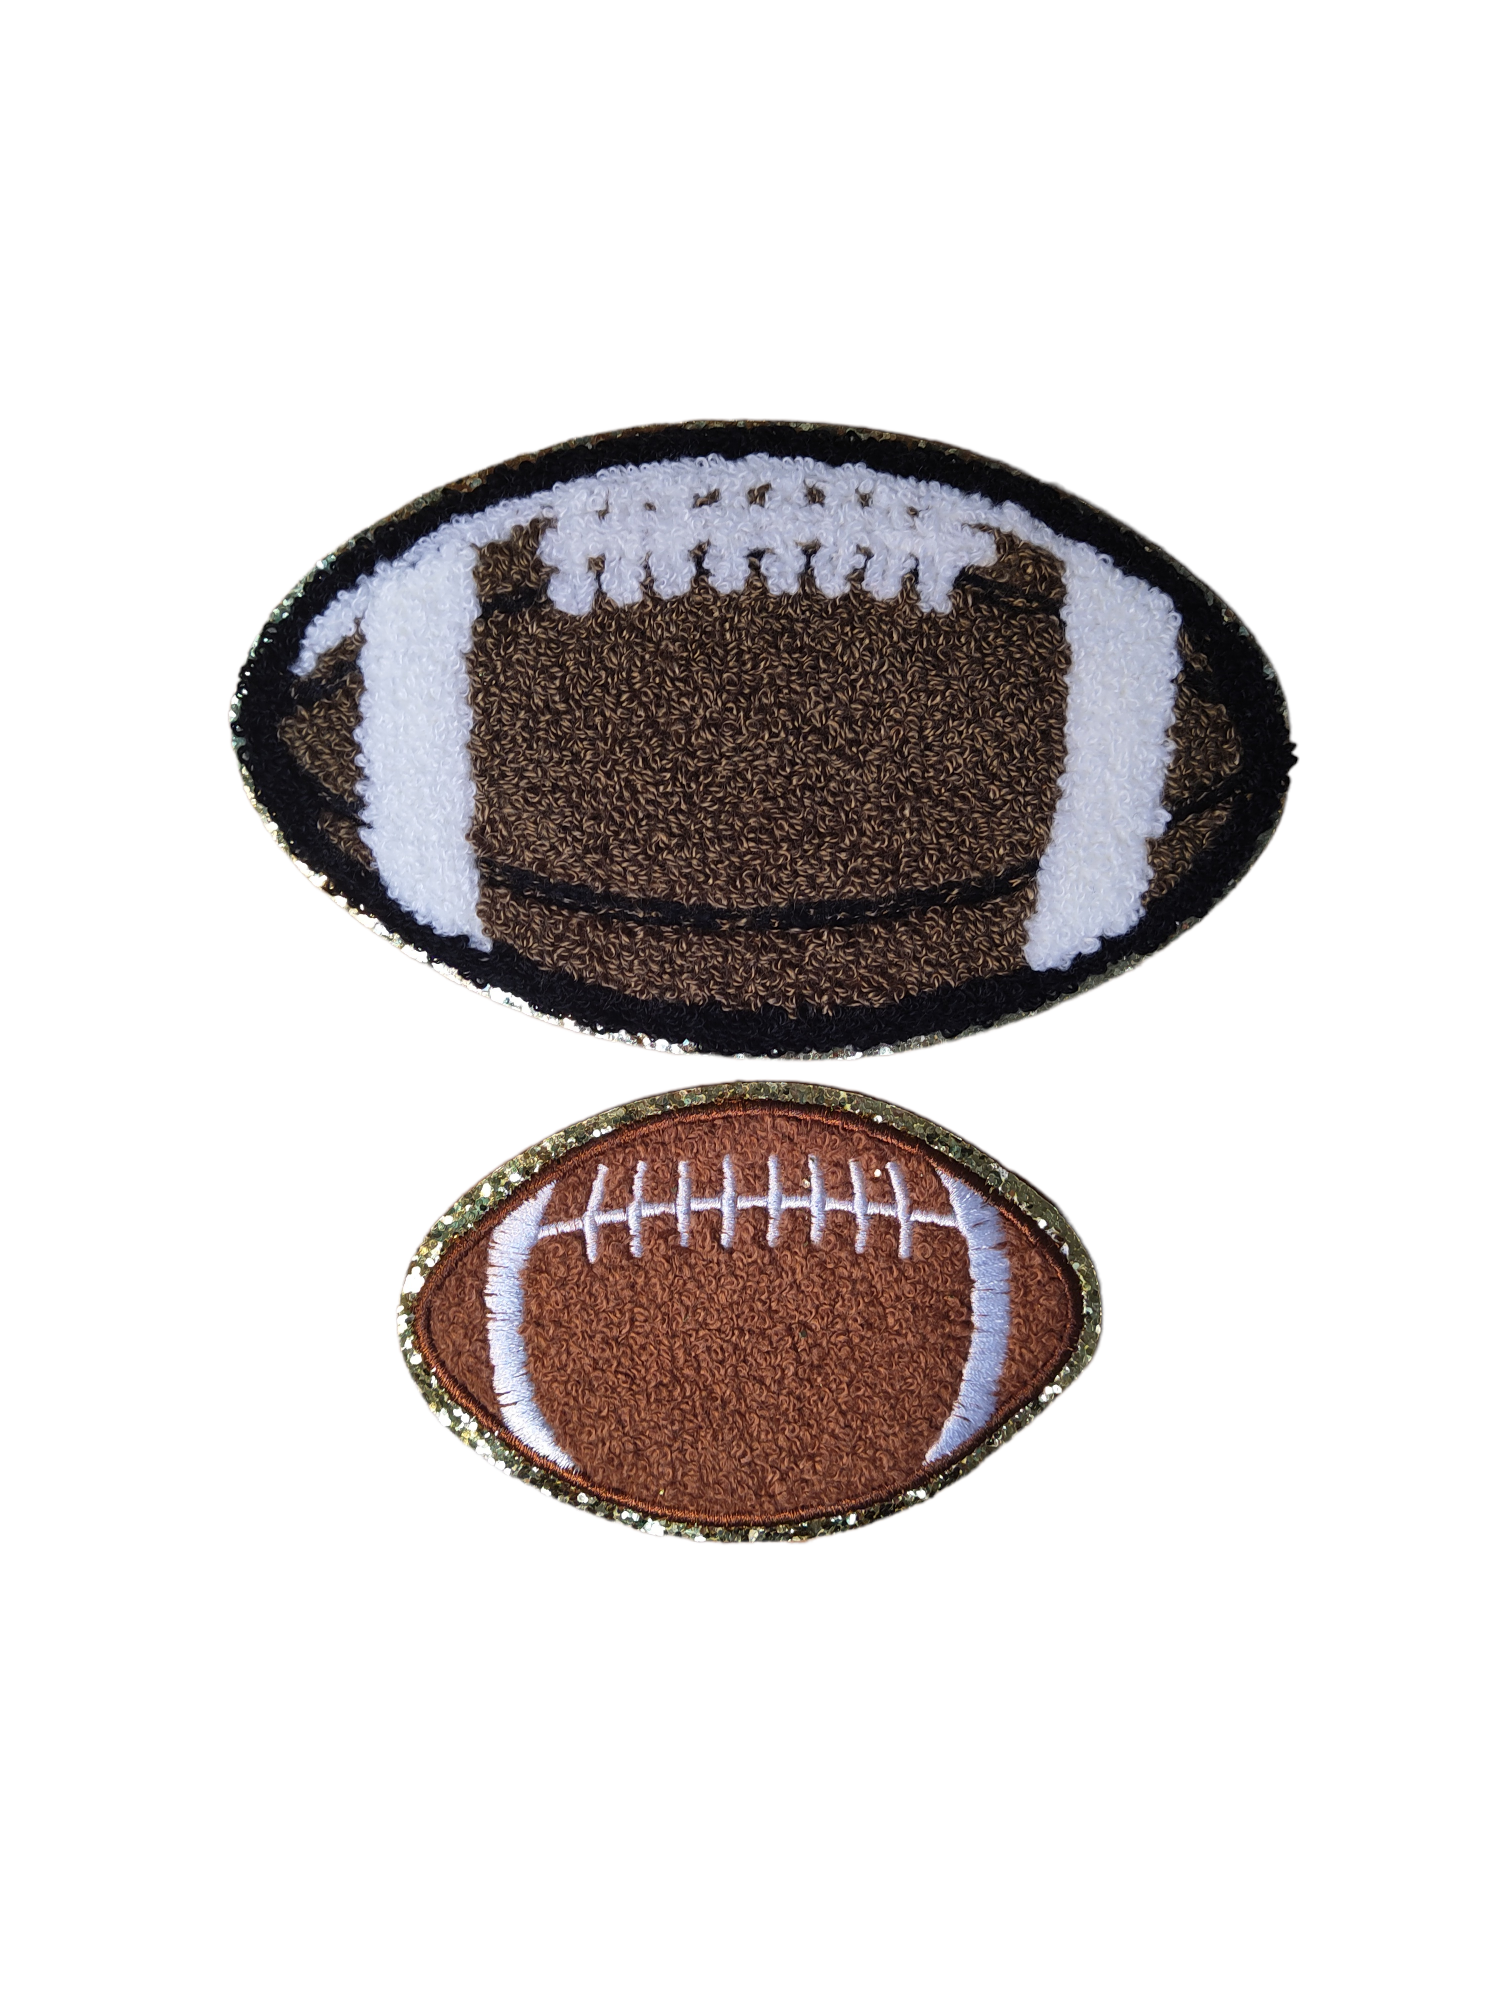 SaktopDeco 12 Pcs Football Patch Gold Edges Chenille Football Iron on Patches Football Embroidered Patches for DIY Clothing